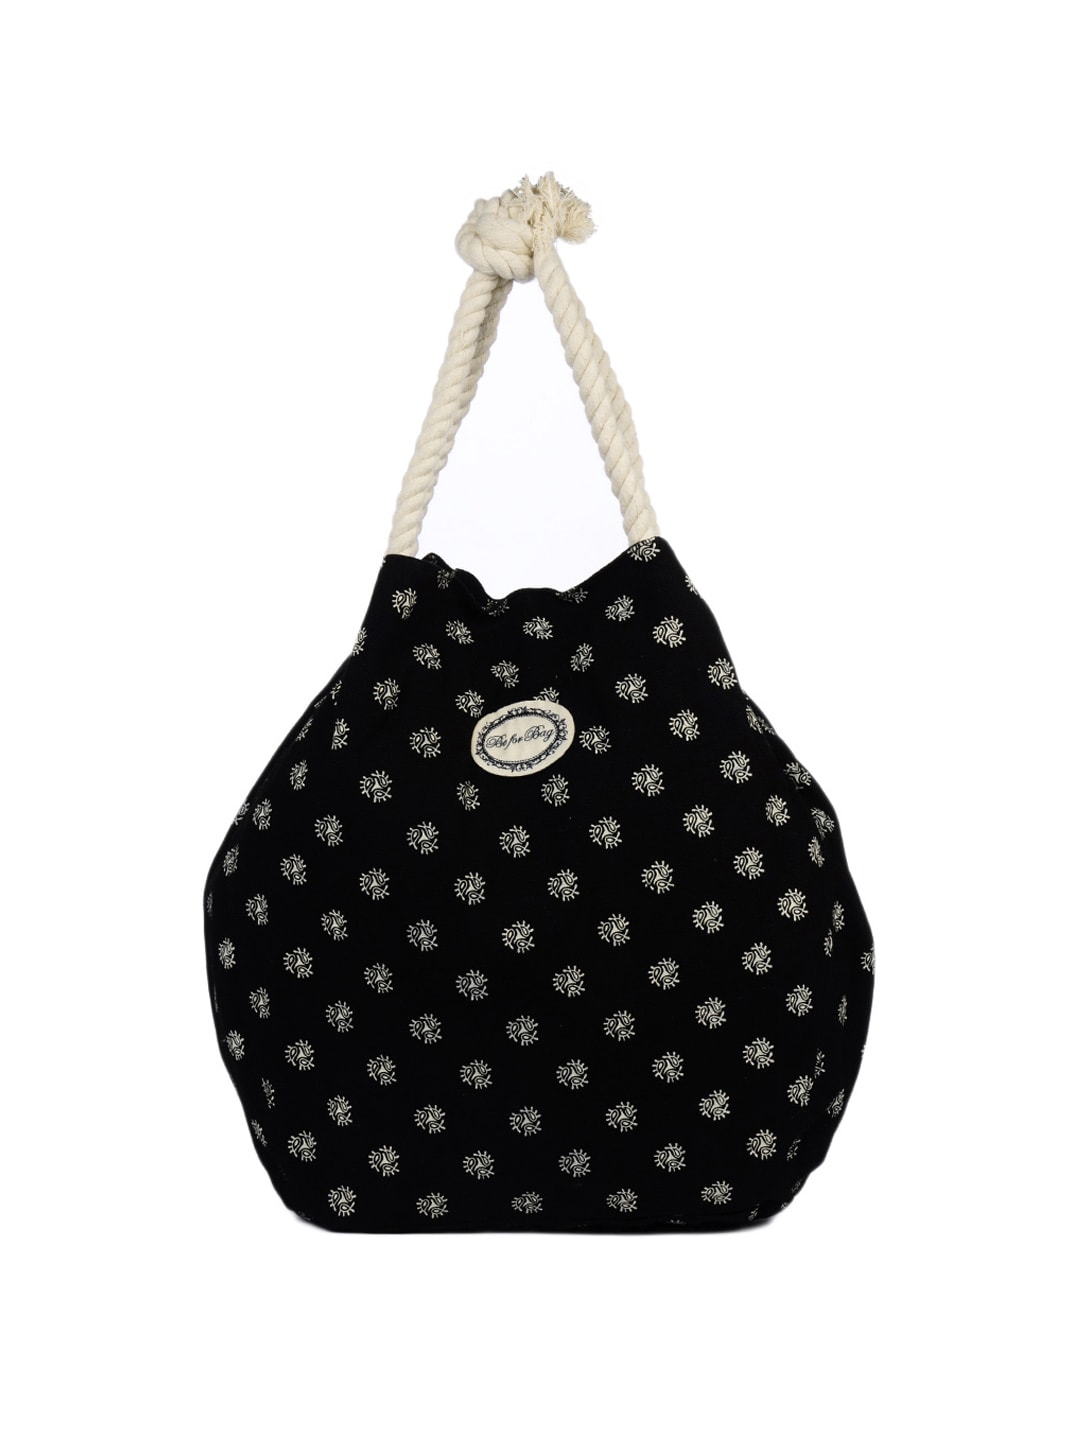 Be For Bag Women Black And White Tote Bag